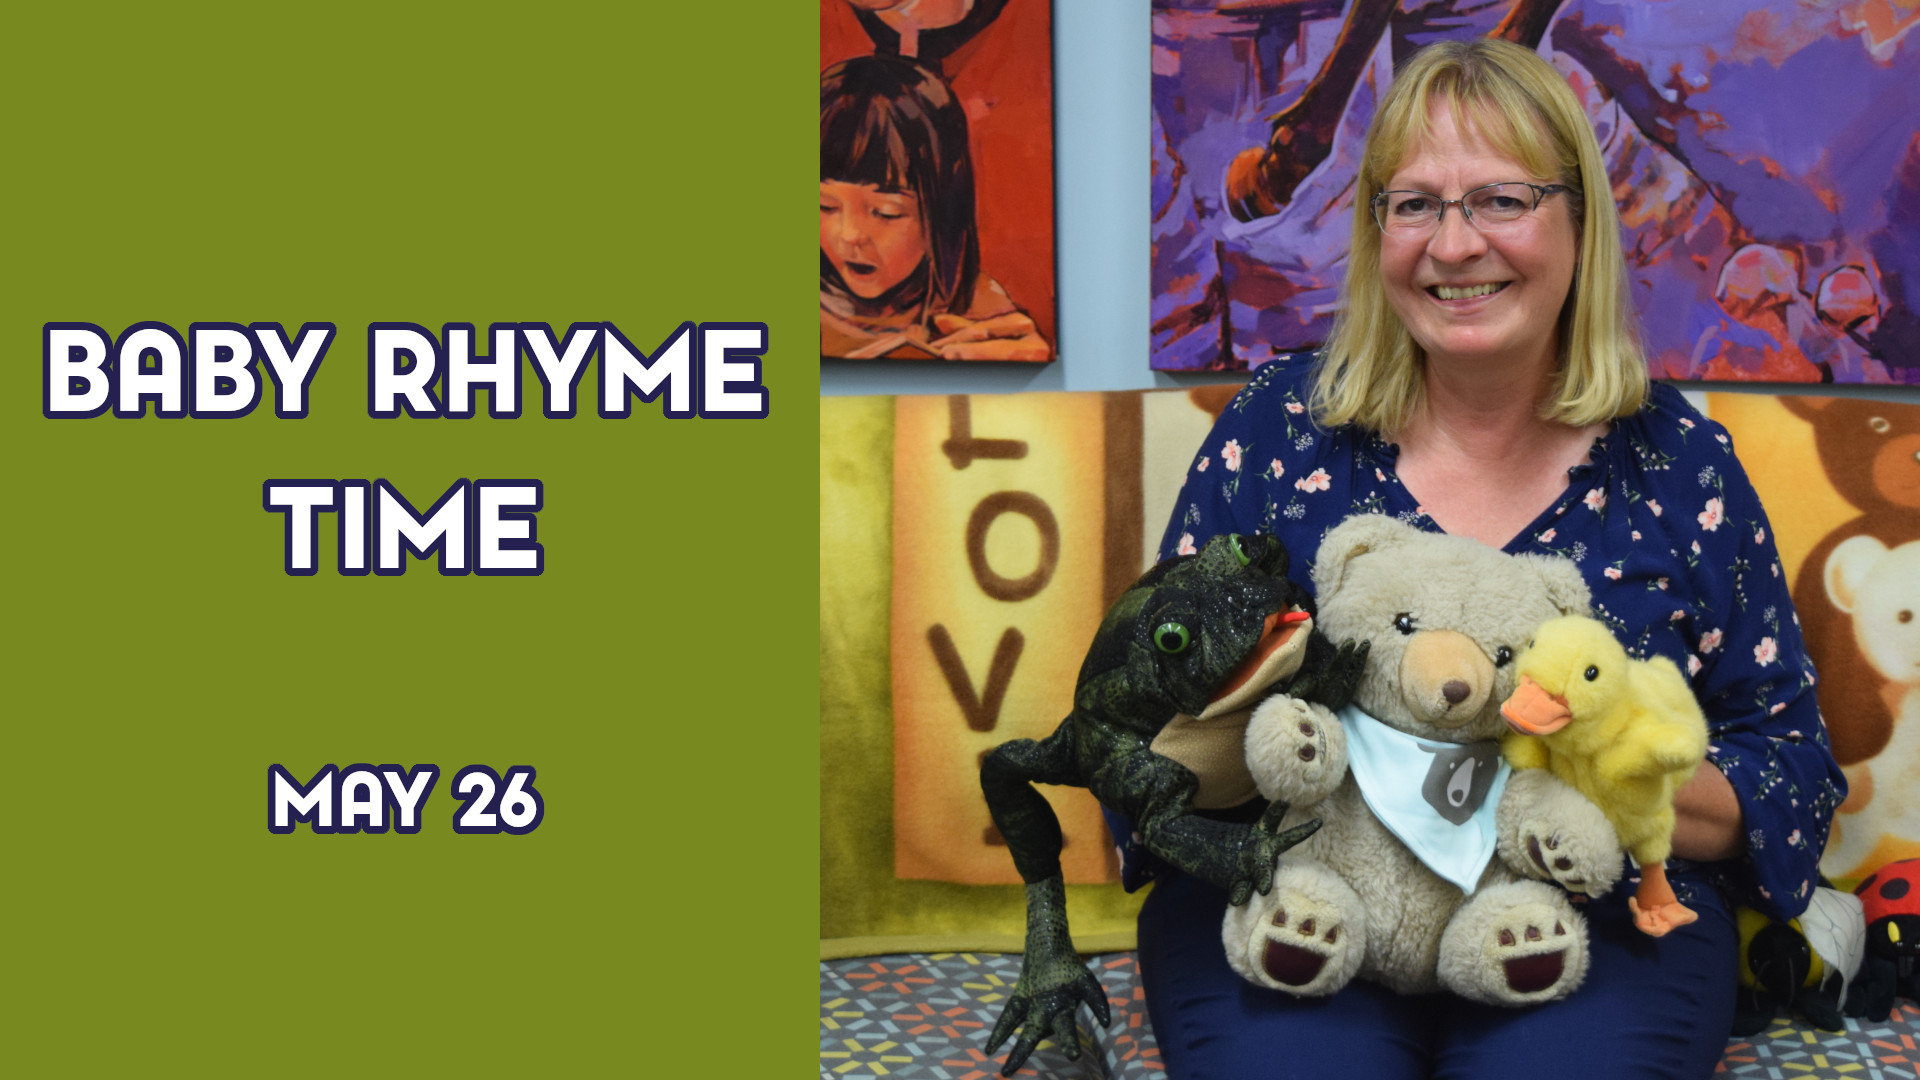 A woman holds stuffed animals next to the text "Baby Rhyme Time May 26"